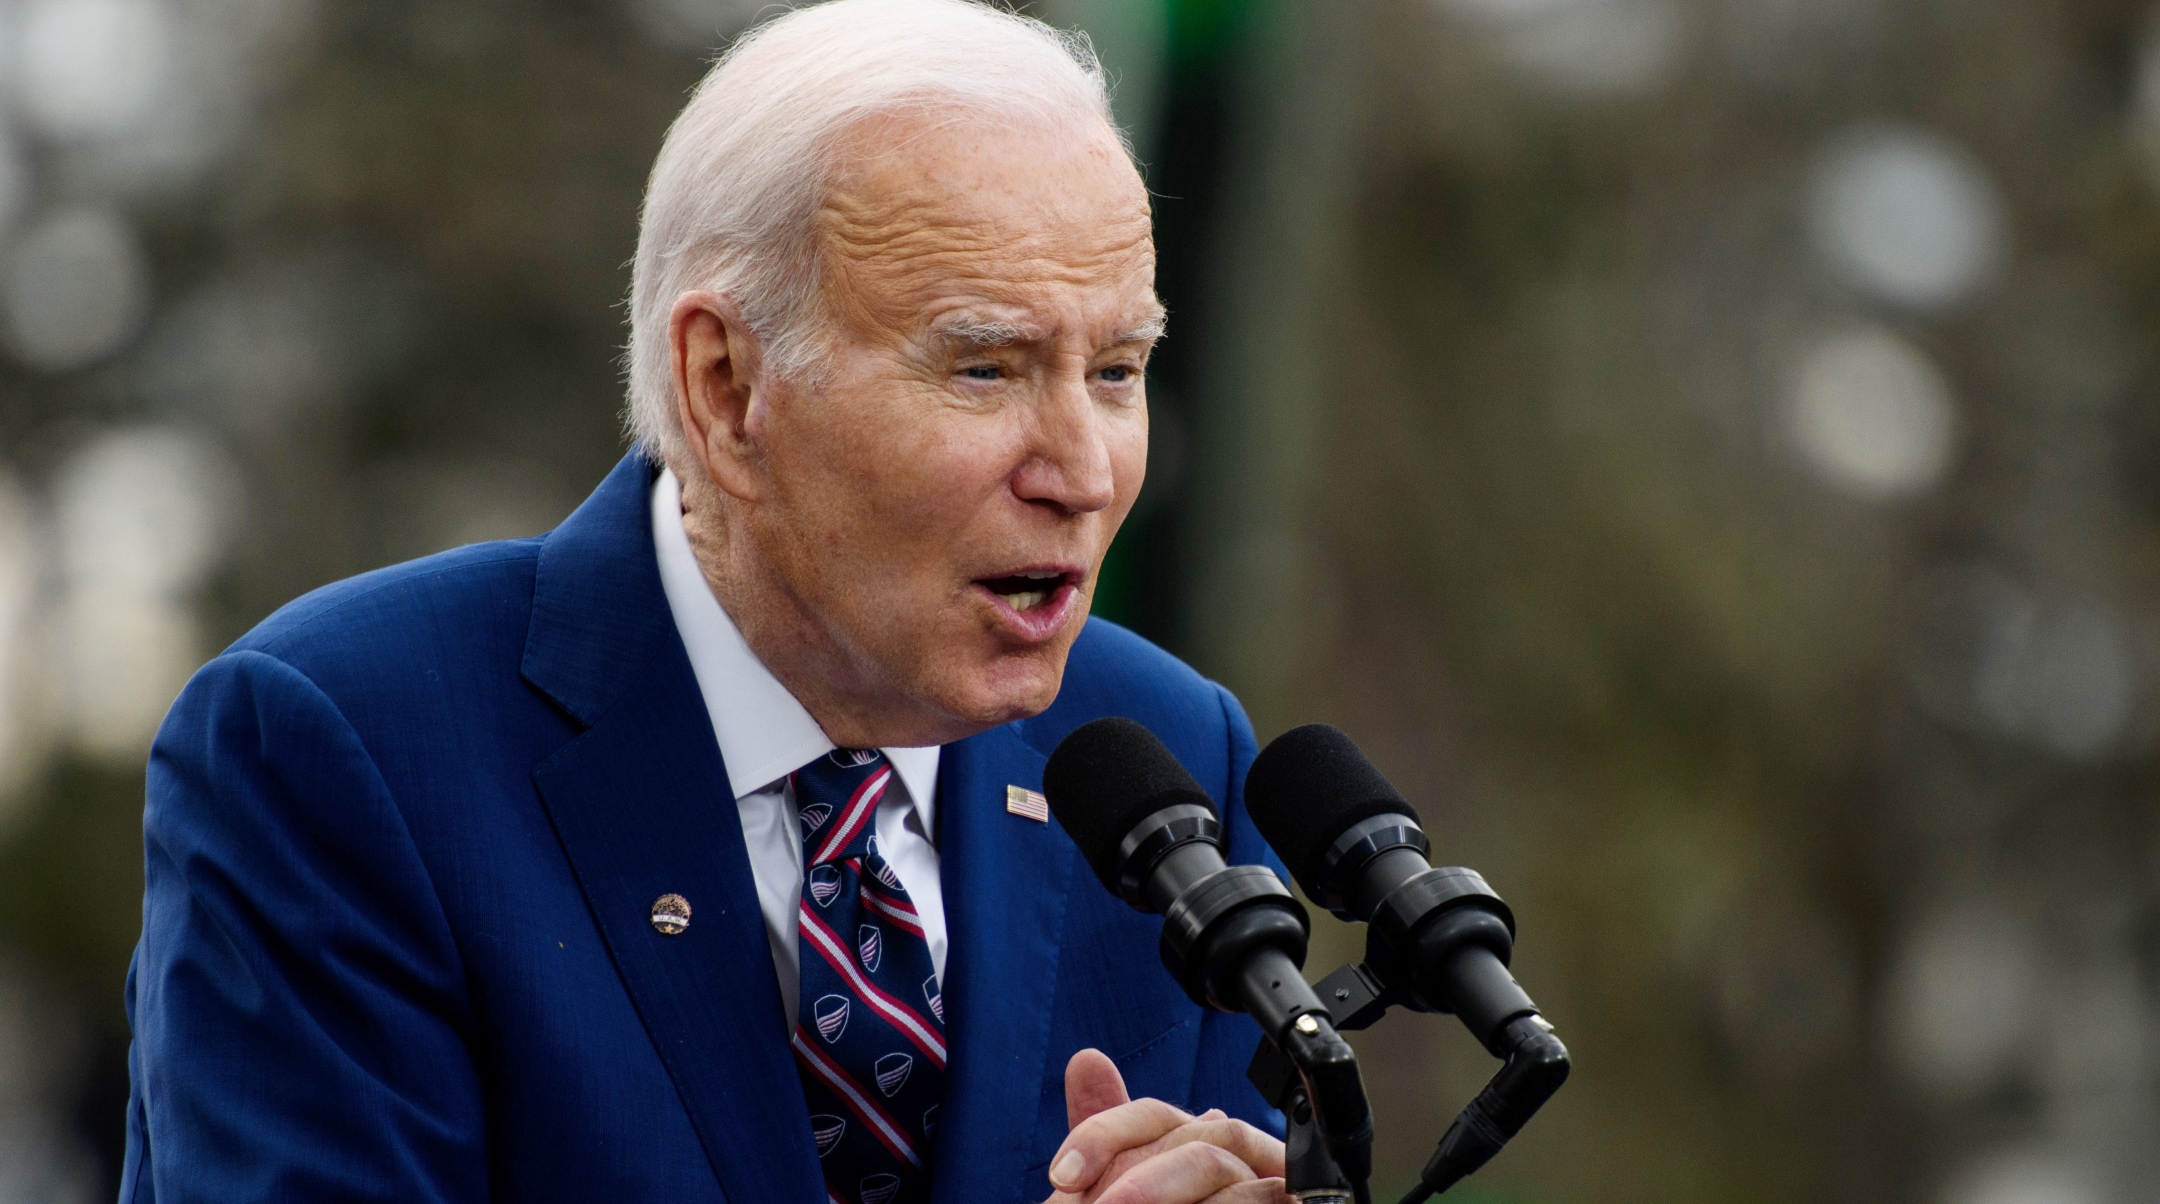 Biden says Israel ‘cannot continue down this road,’ says he won’t invite Netanyahu soon